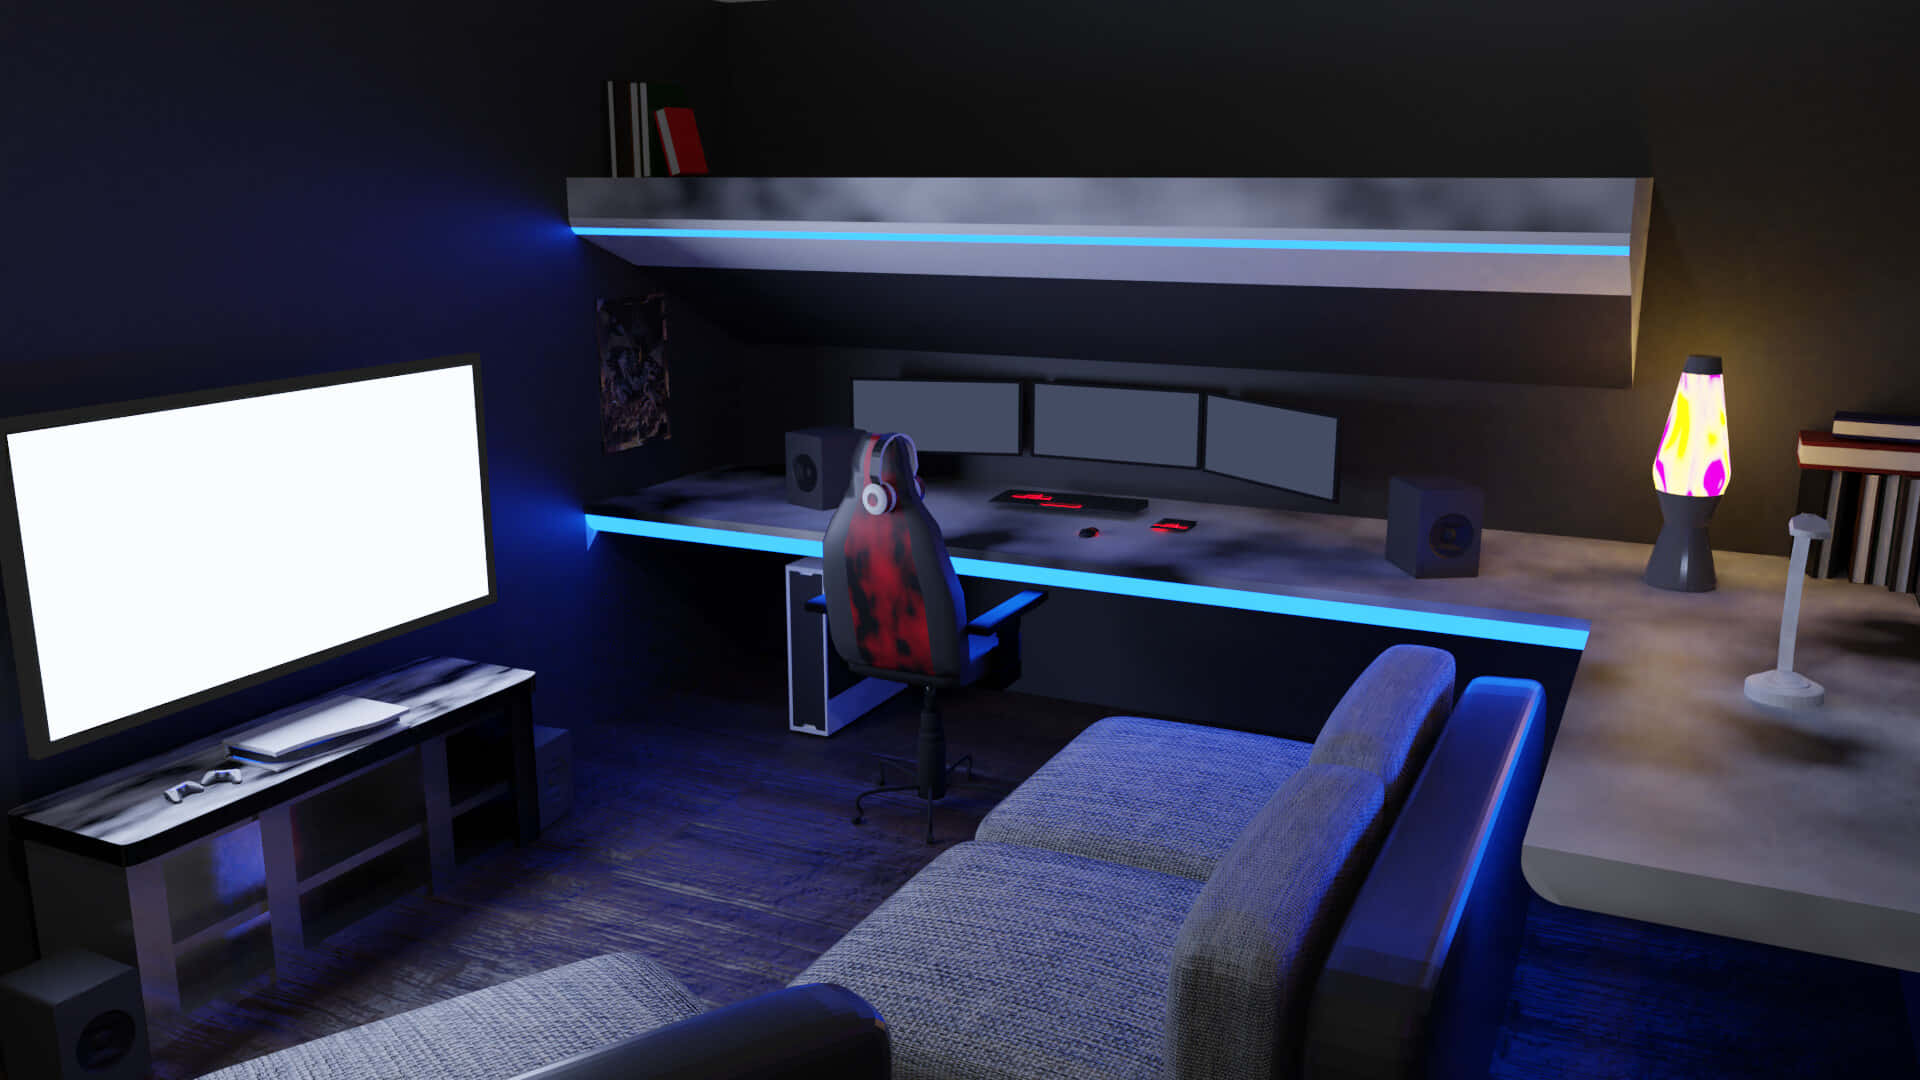 Get lost in the ultimate gaming experience in this state-of-the-art gaming room.